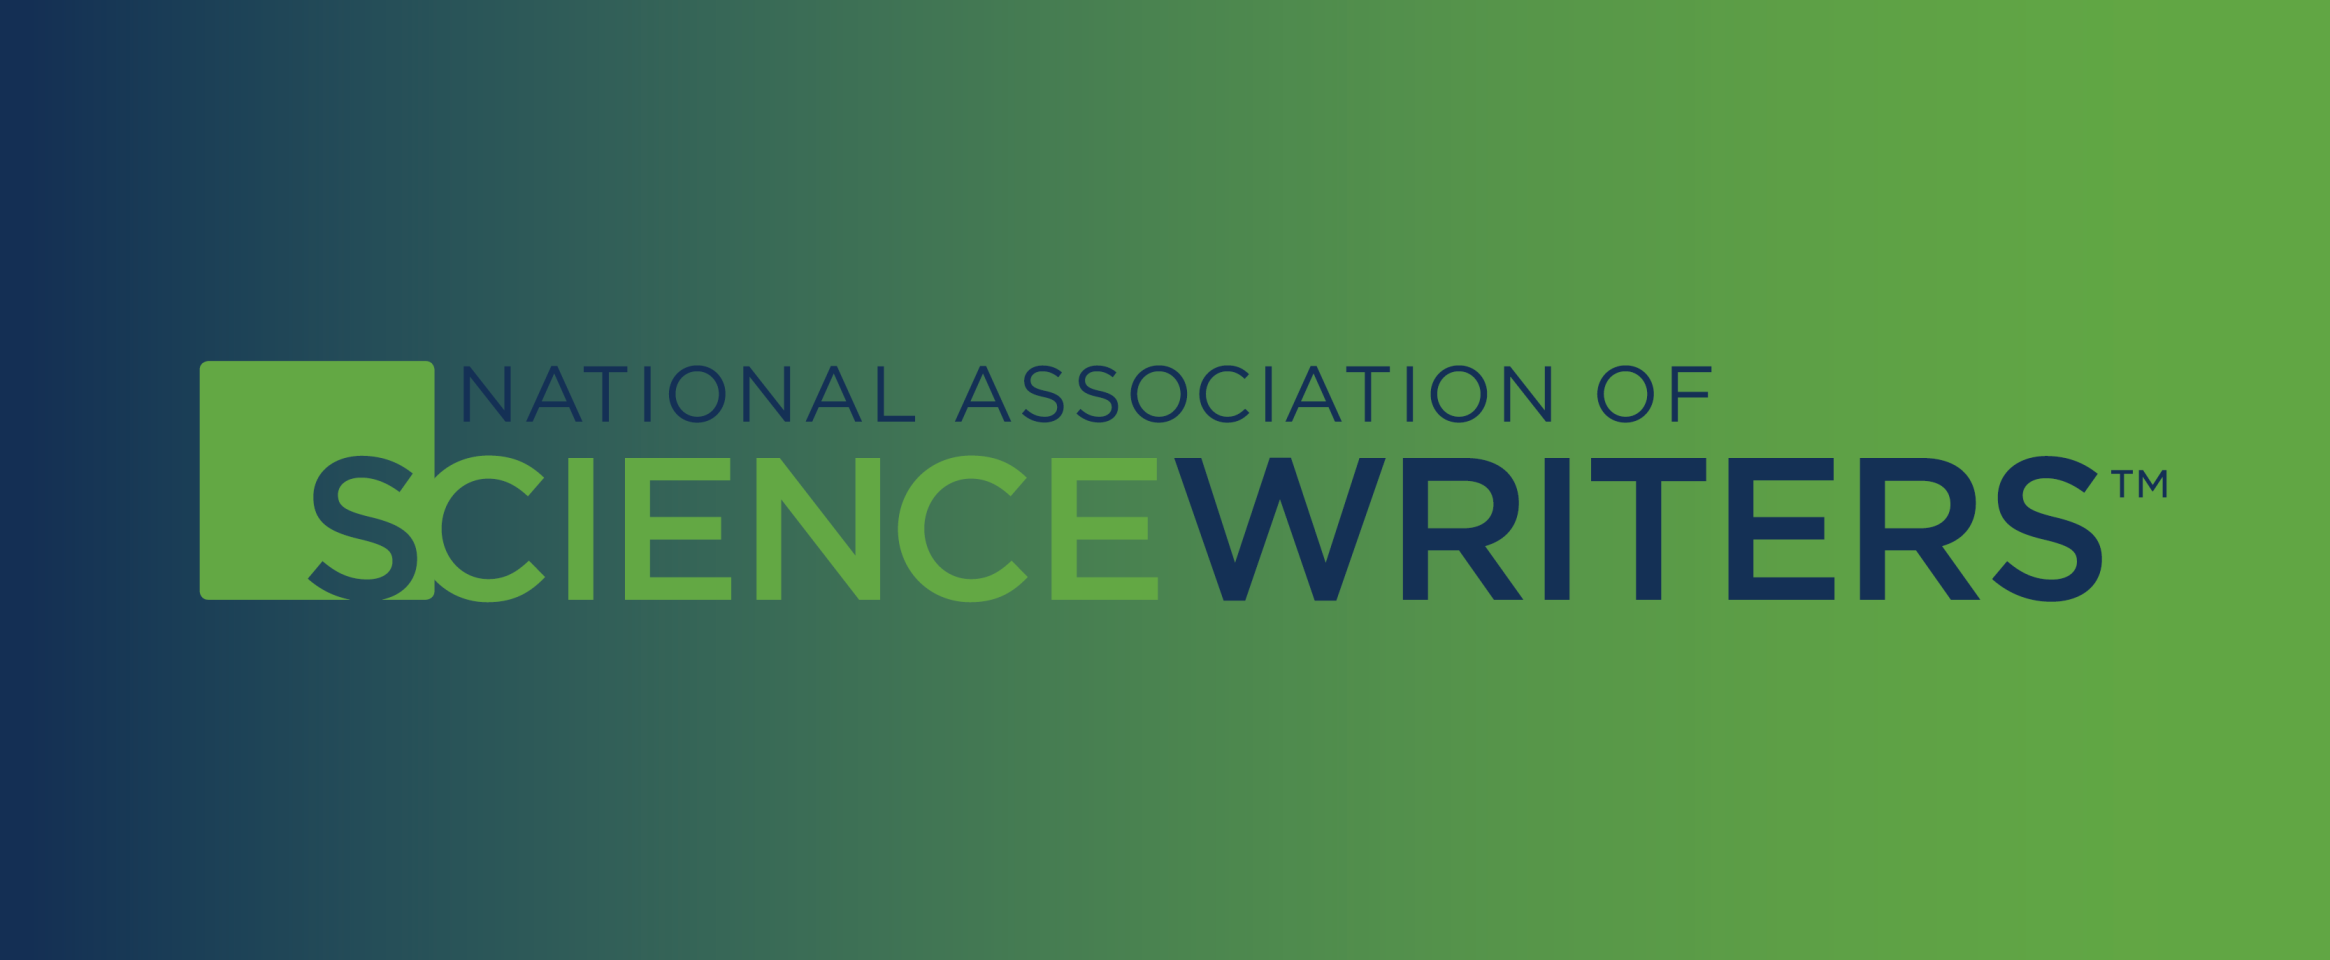 Logomark of the National Association of Science Writers against a contrasting horizontal gradient background